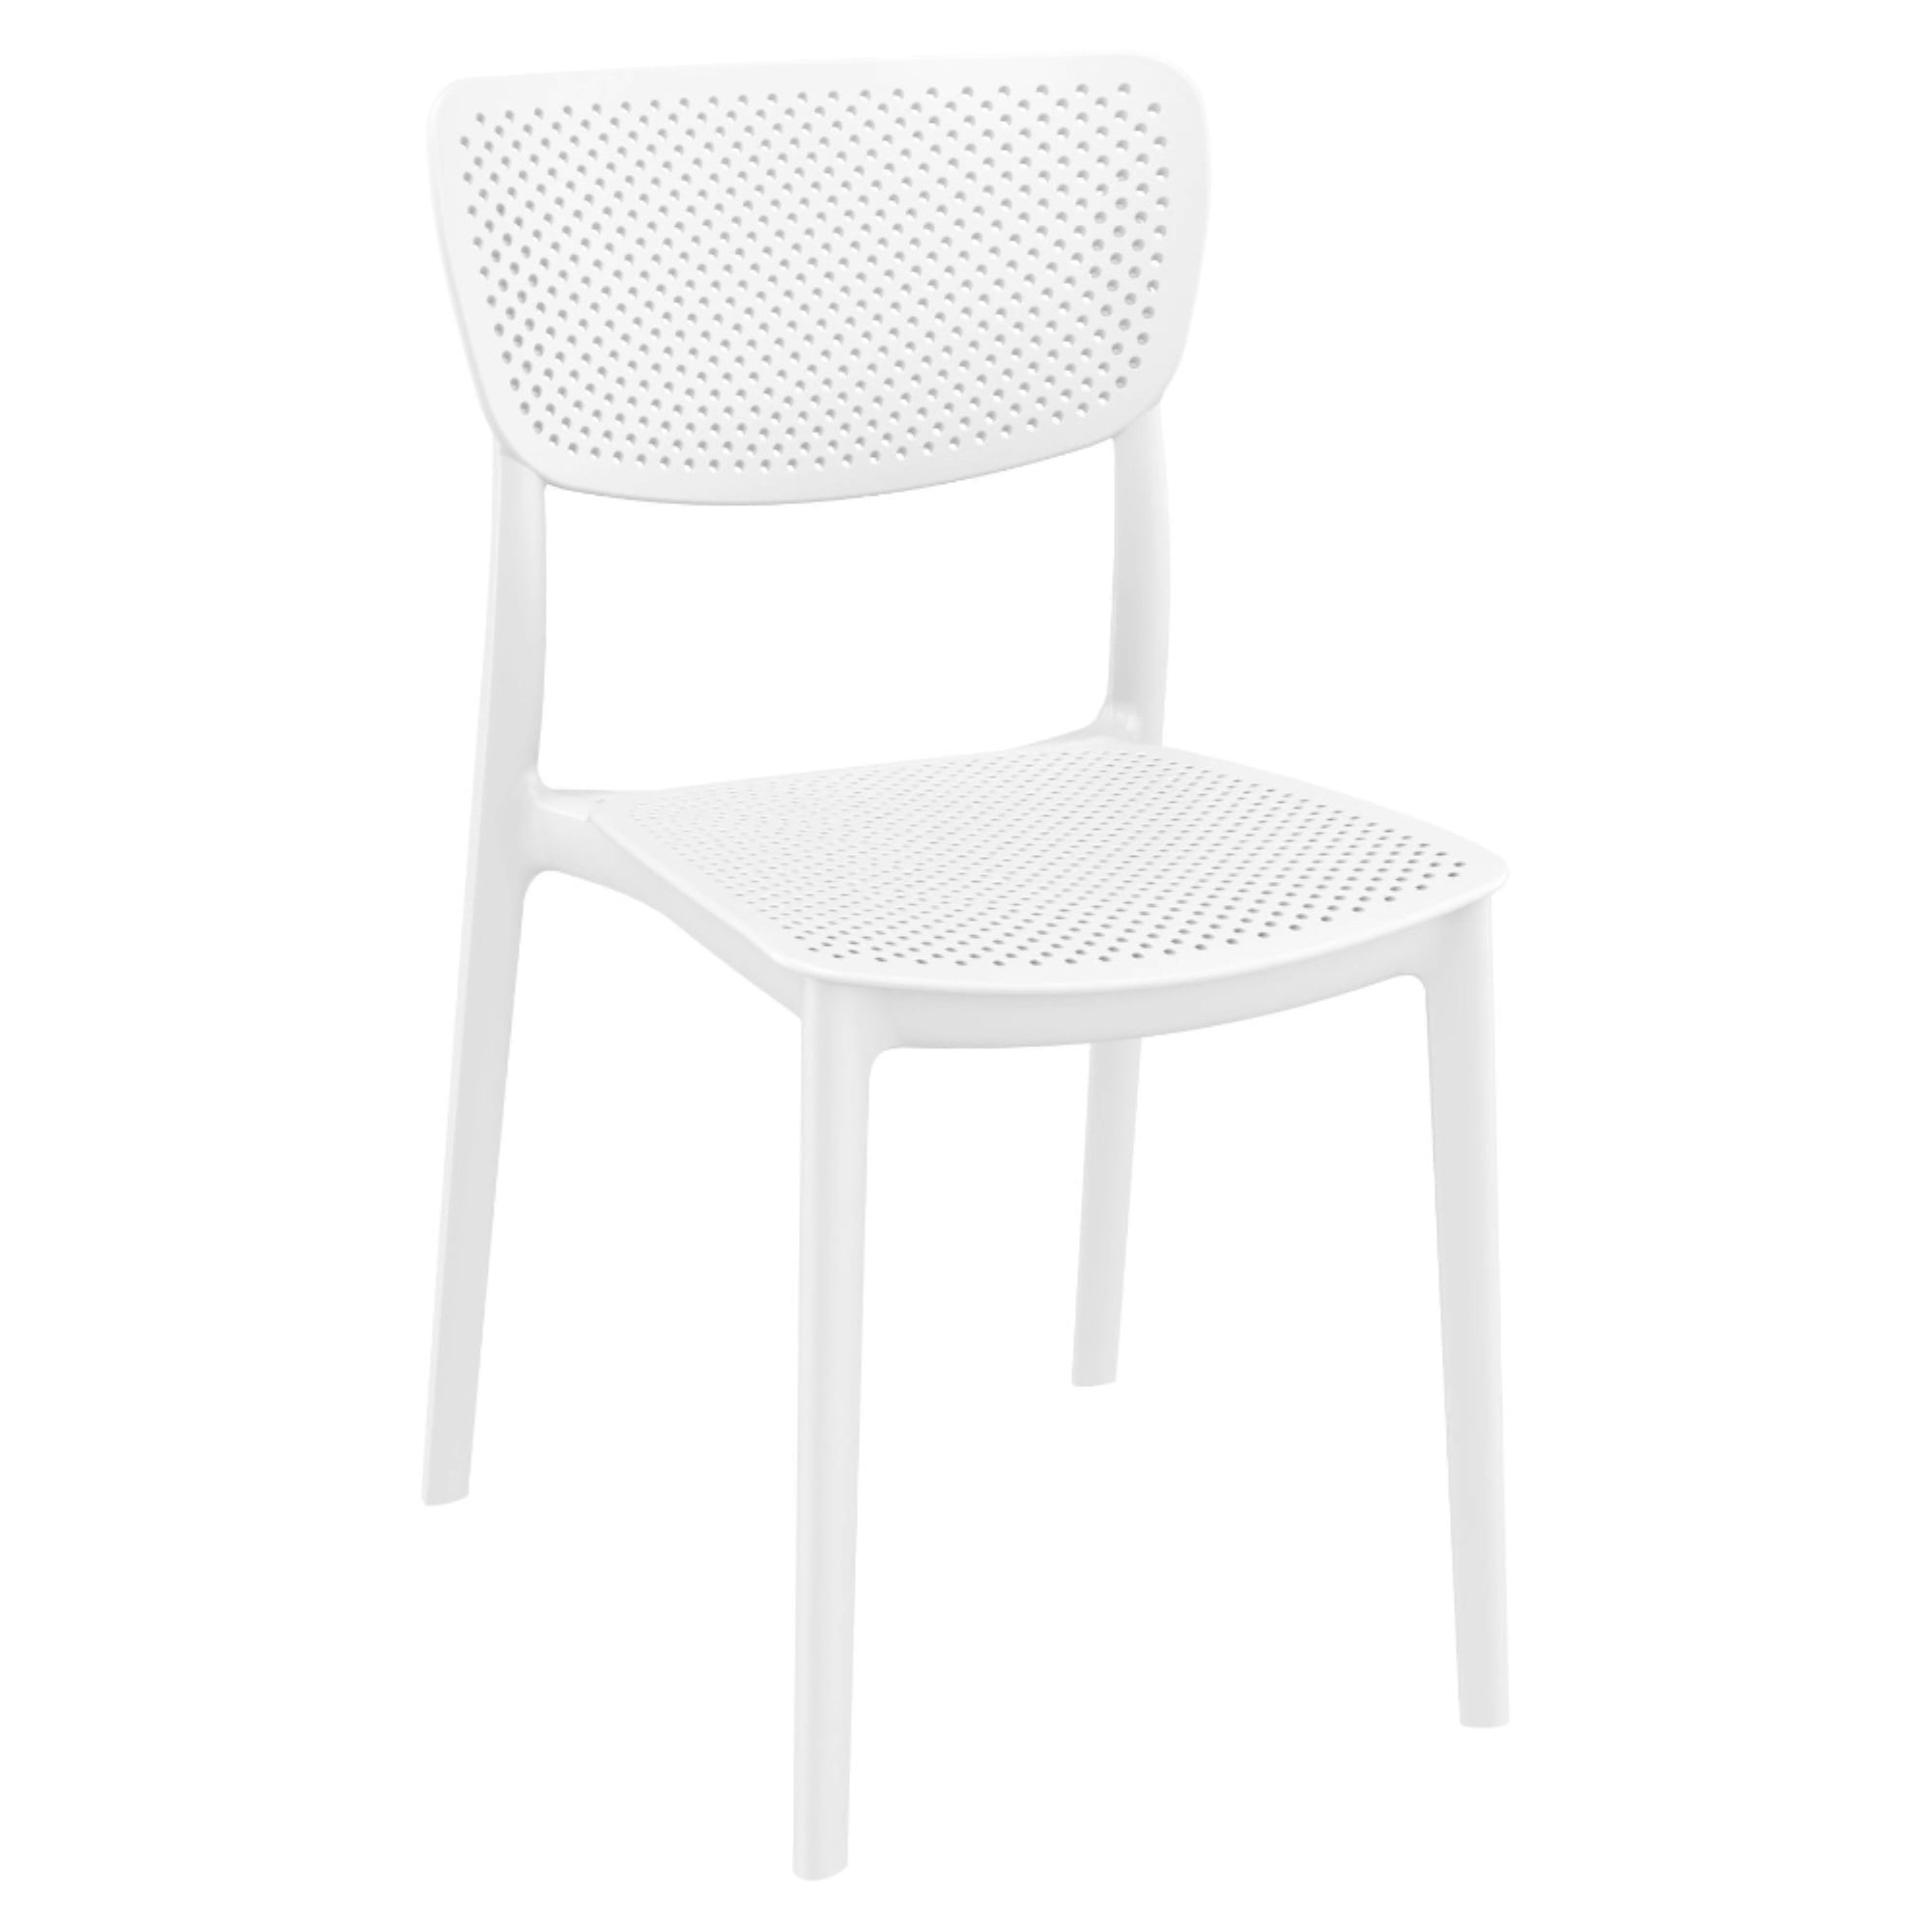 Isp129-whi Lucy Outdoor Dining Chair - White